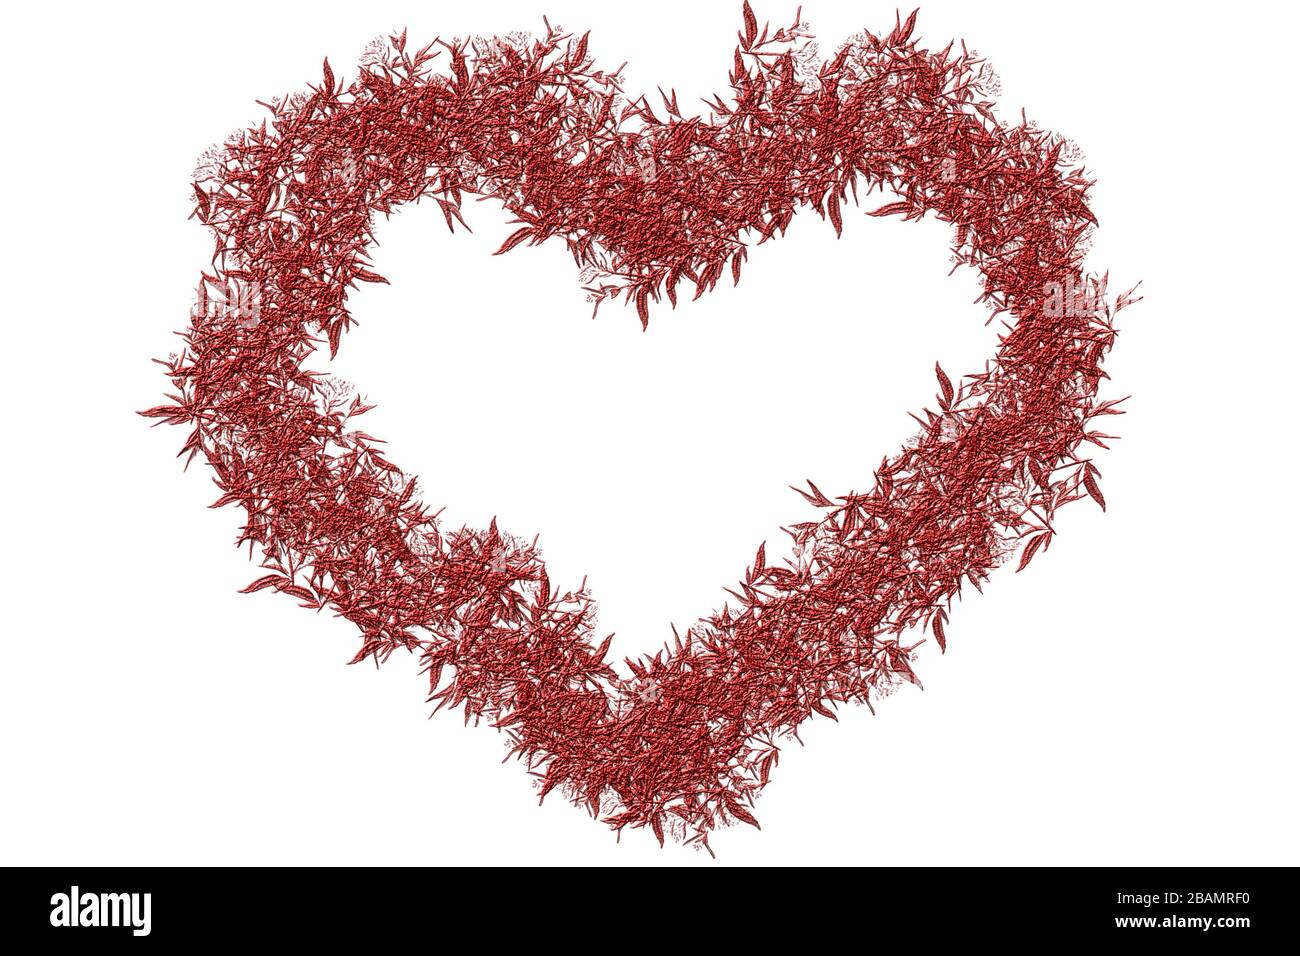 3D Red Decorative Hearts on White Background Stock Photo